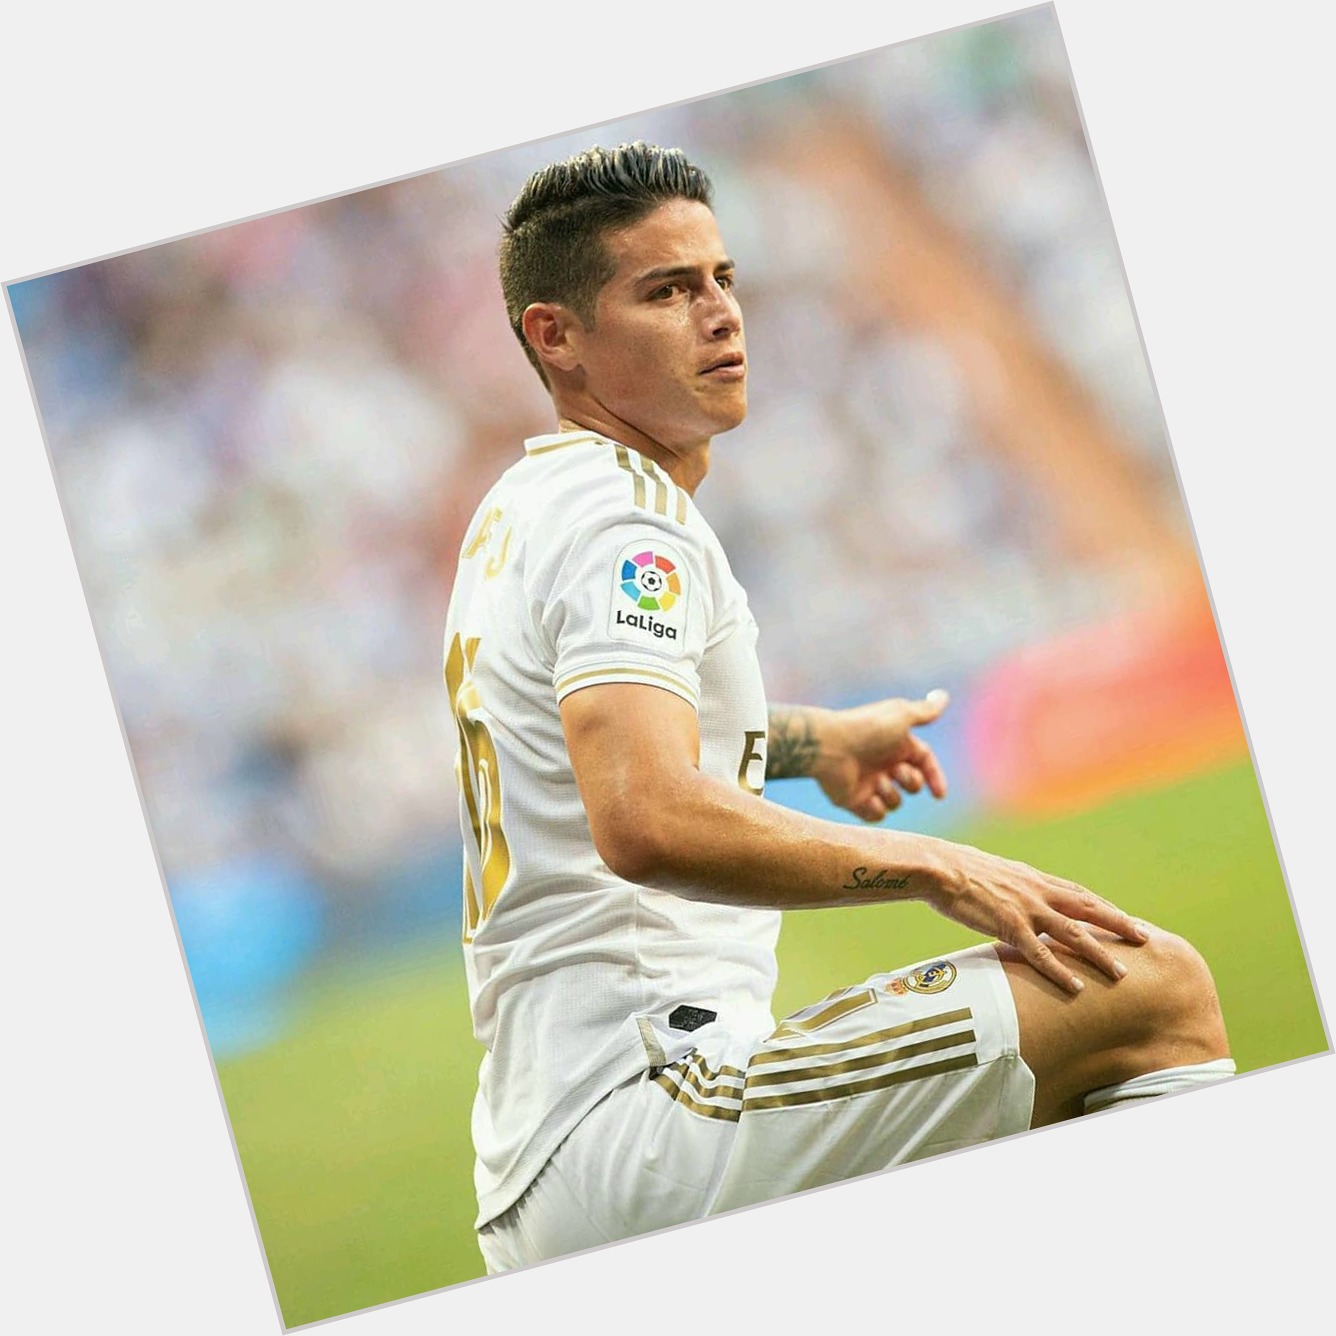 Happy birthday to James Rodriguez who turned 29 today!  